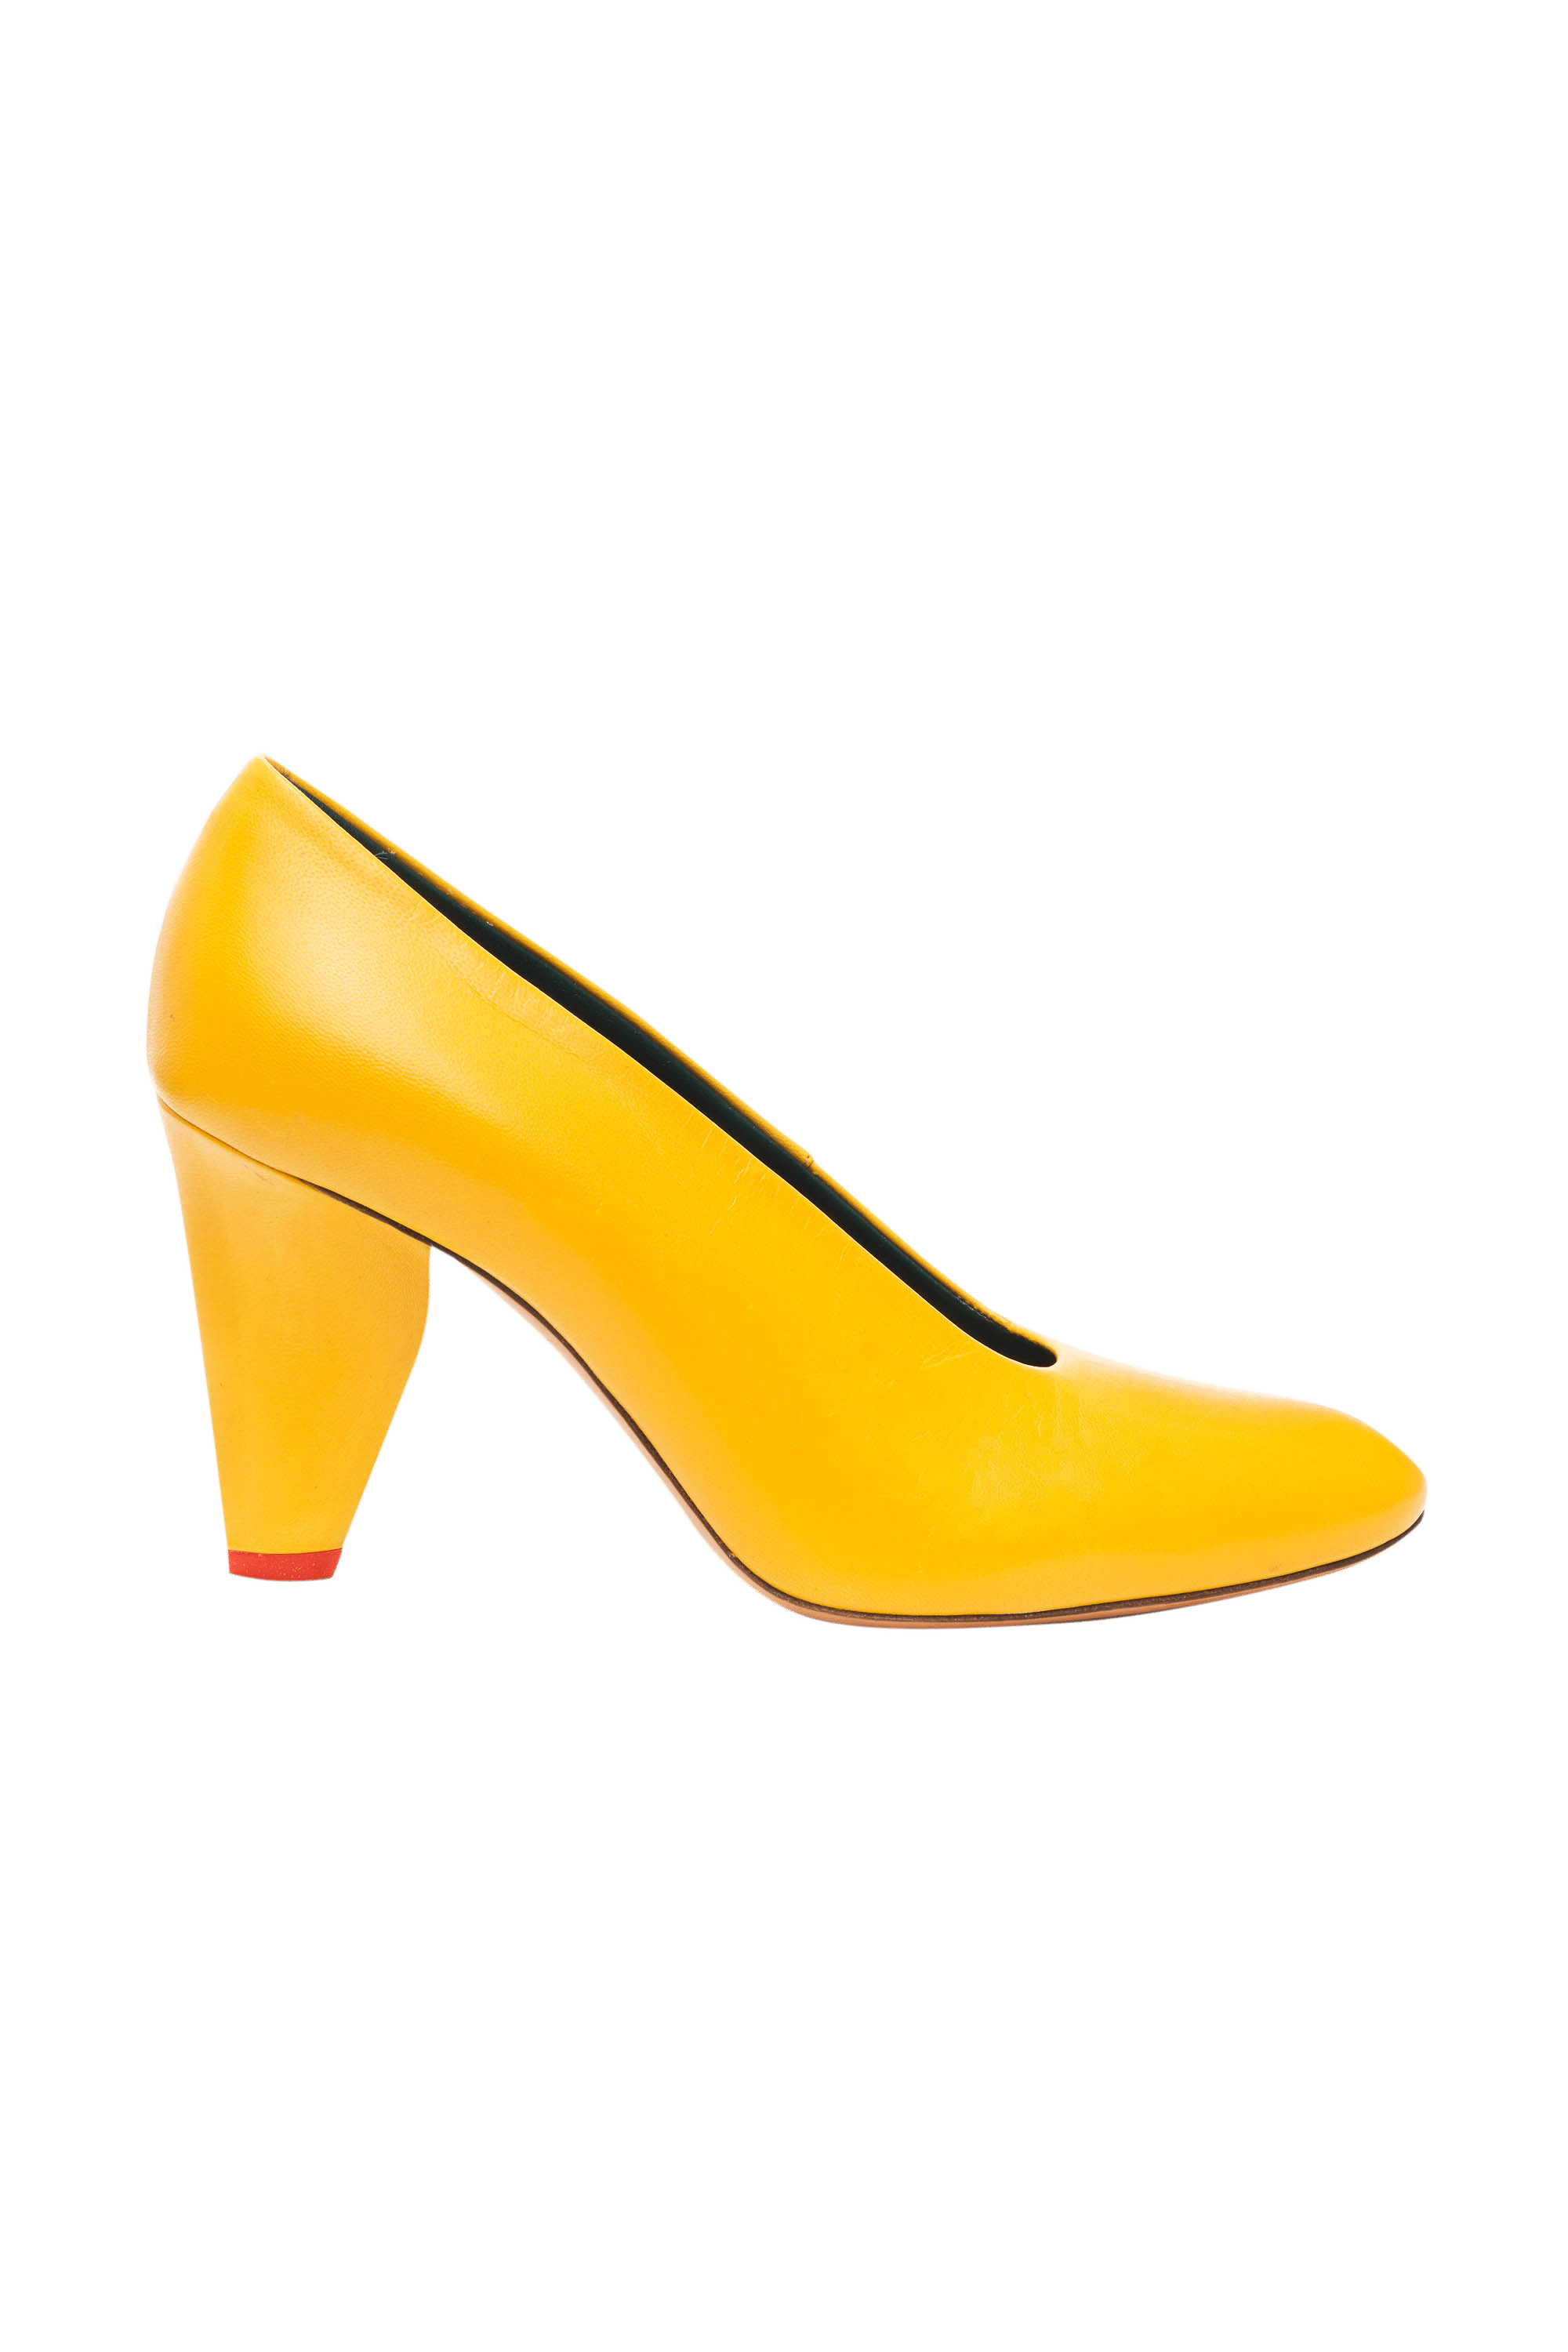 Celine Yellow Pumps with Red Heel Size 36